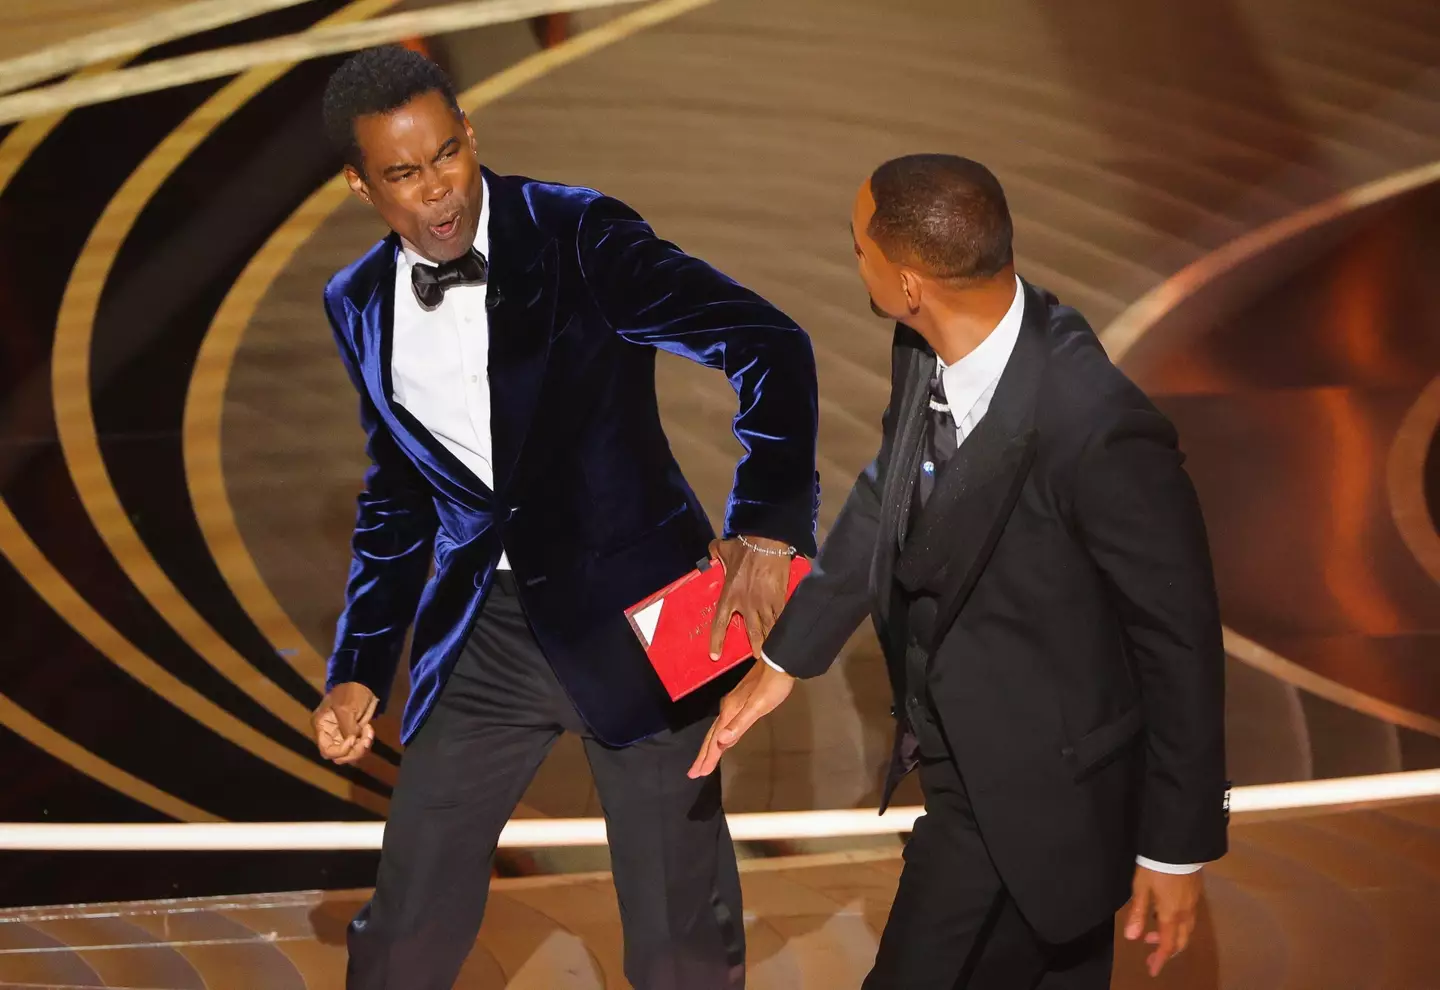 Chris Rock's mum Rose was proud of the way her son reacted to Will Smith slapping him at the Oscars.